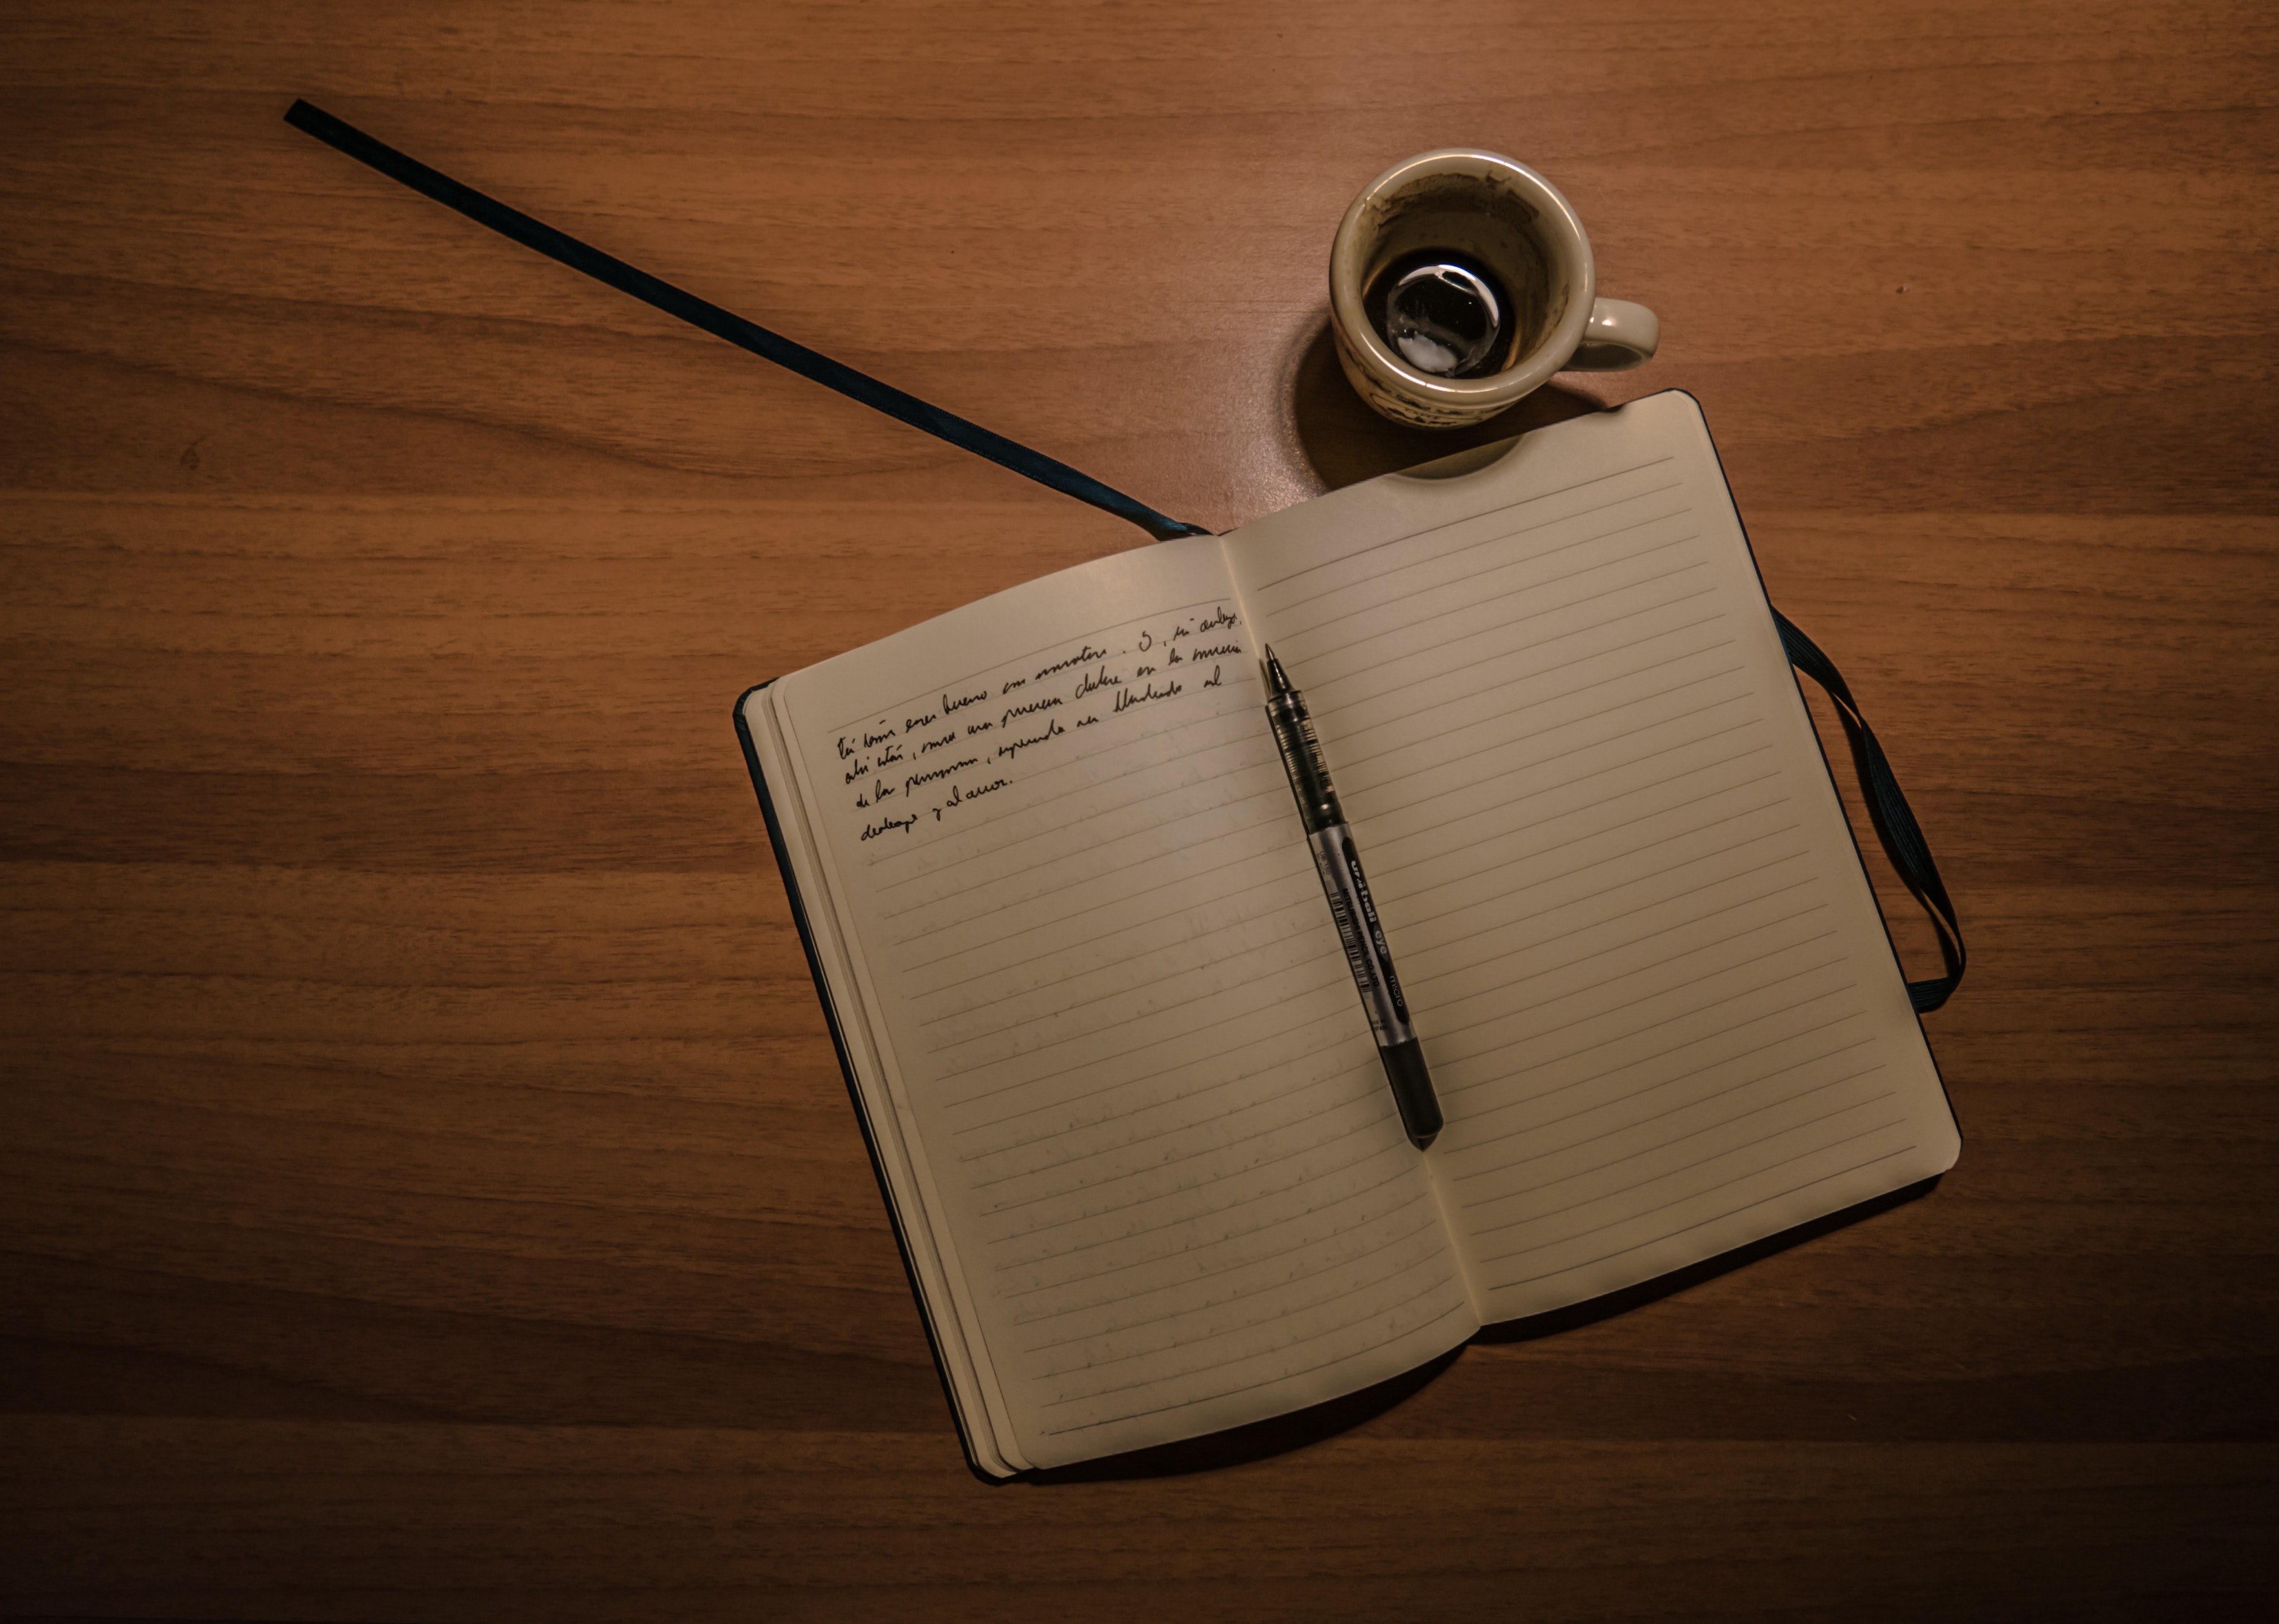 Pen on Notebook Beside a Teacup on Brown Wooden Plank, Beverage, Office, Wooden table, Wood, HQ Photo